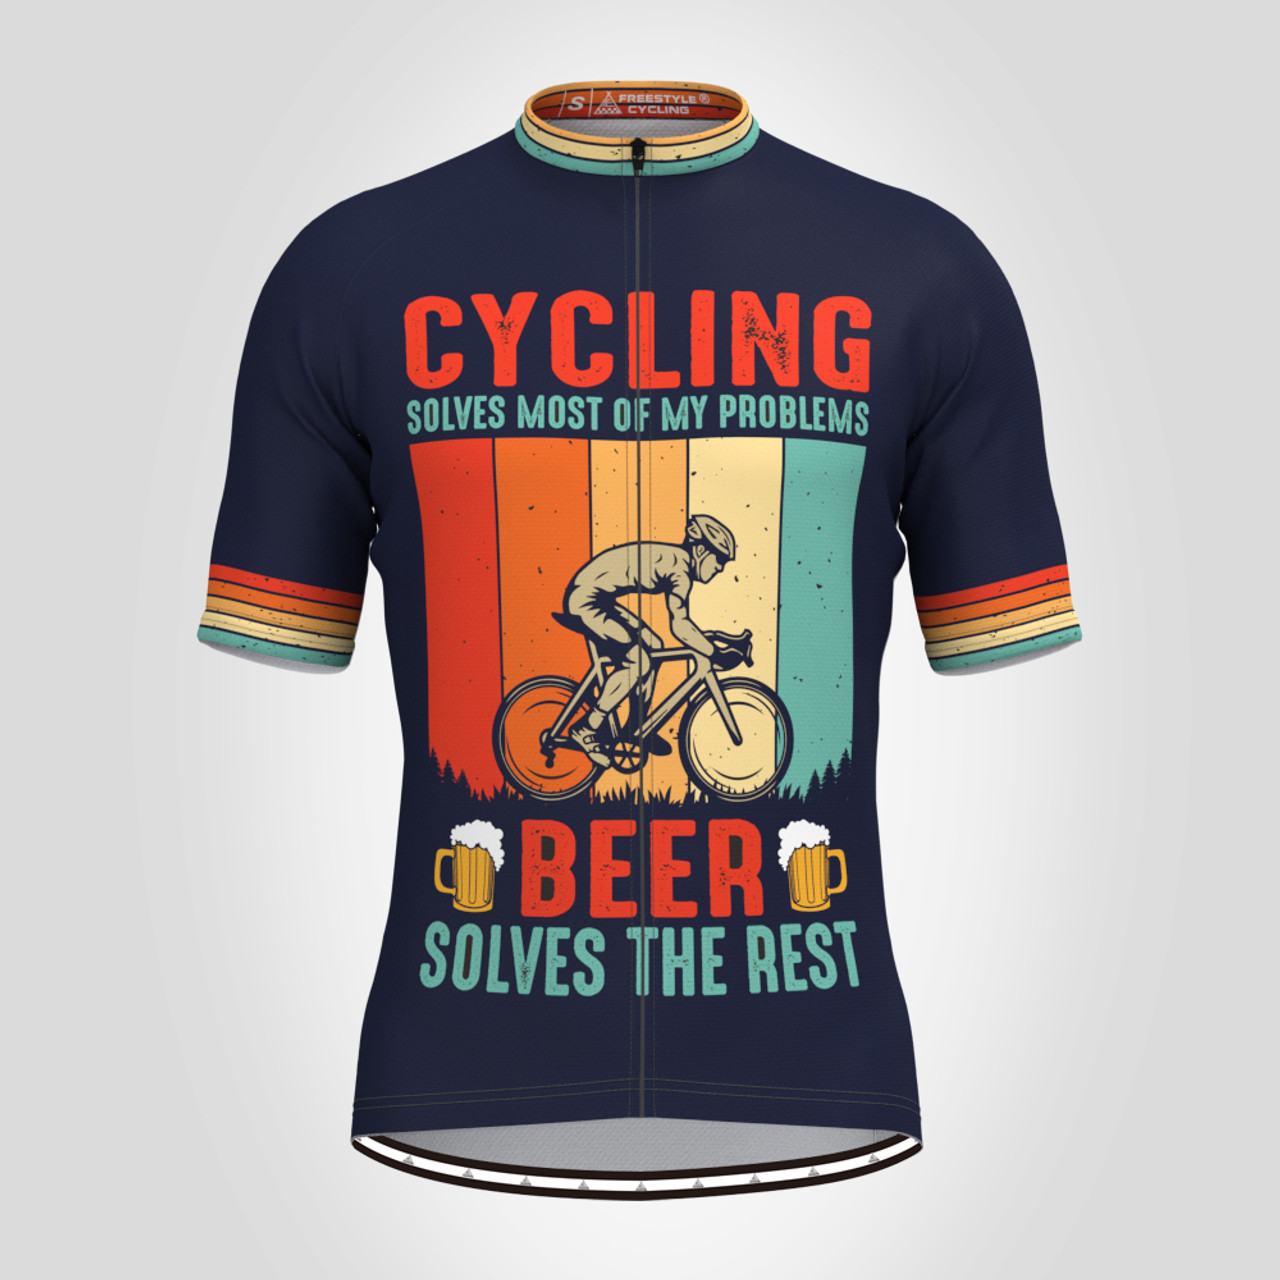 Beer Solves The Rest Men's Cycling Jersey - Navy